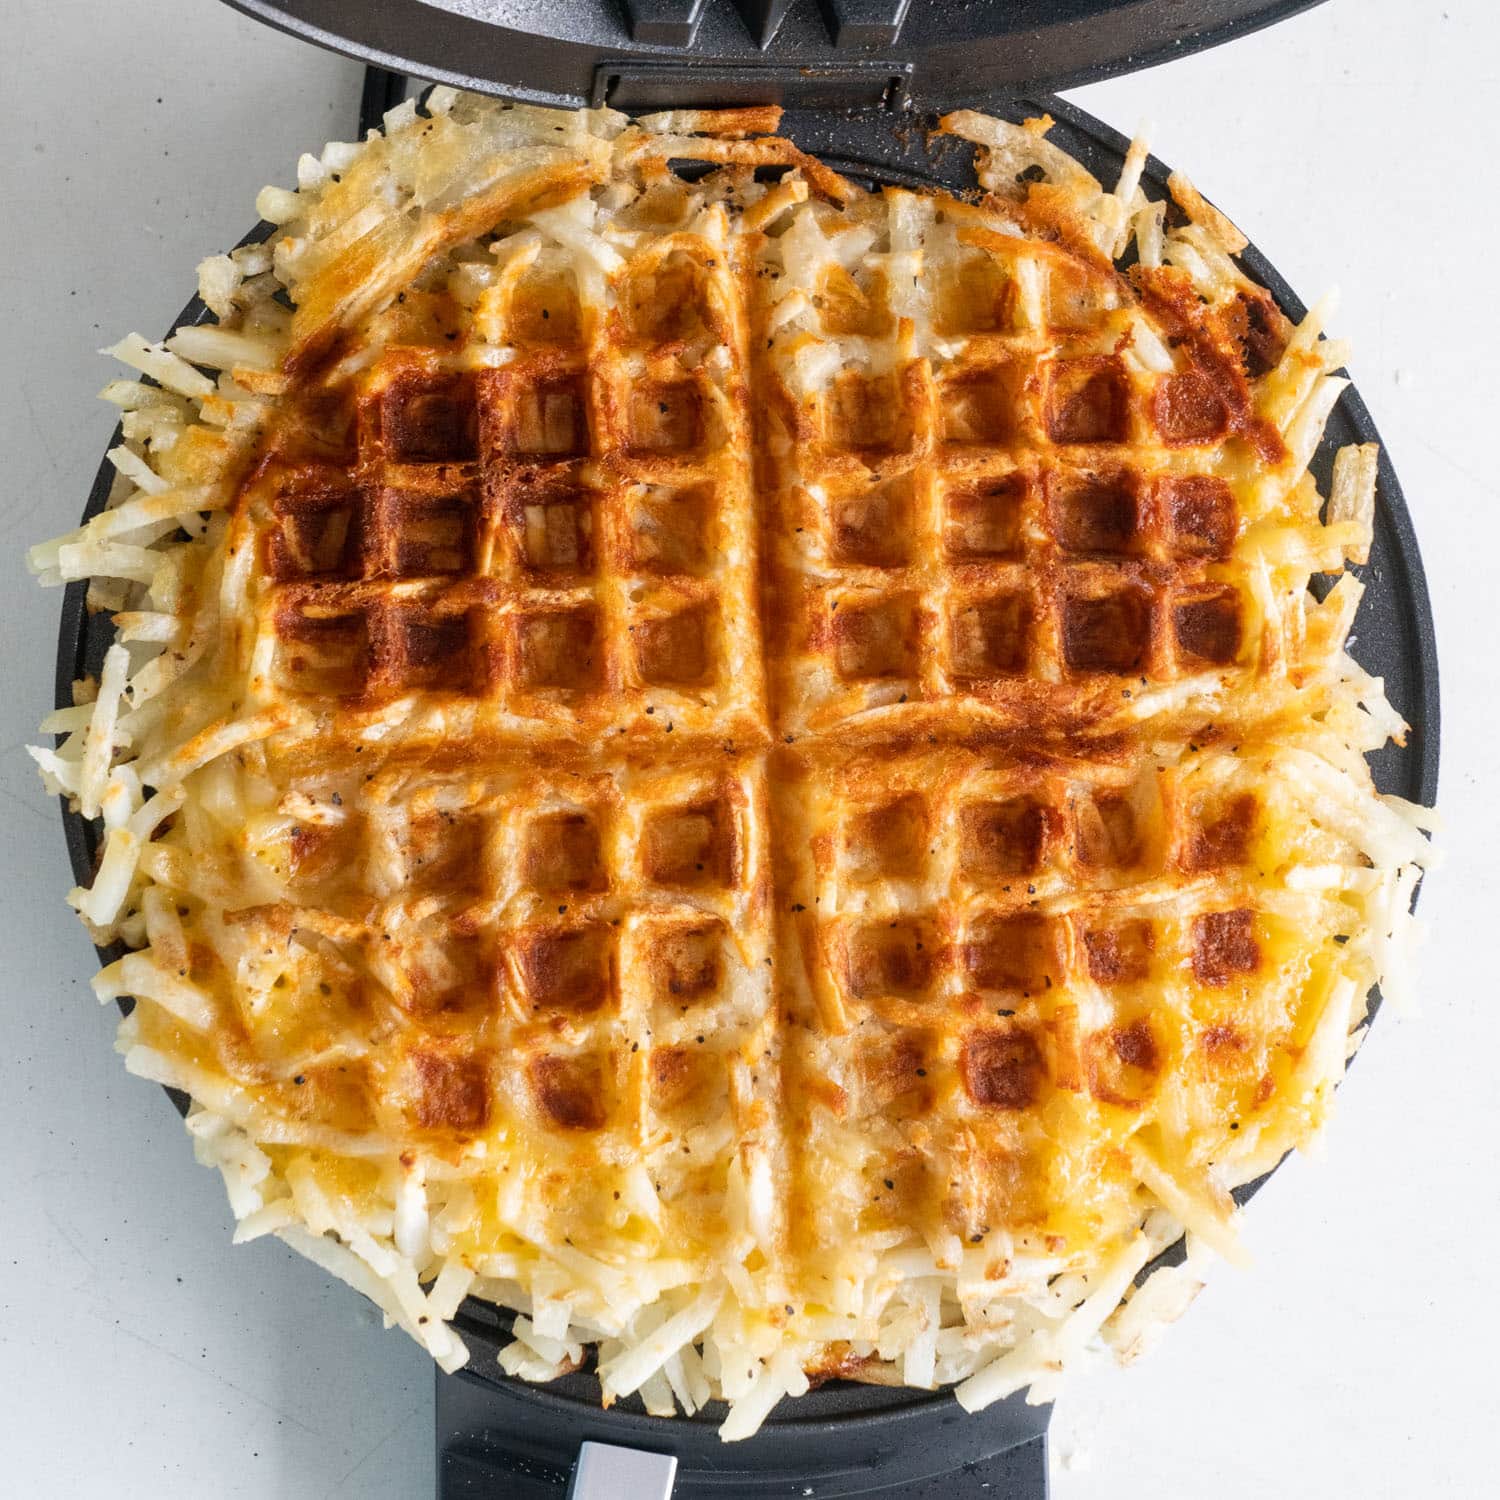 How to Make Hash Browns in a Waffle Iron